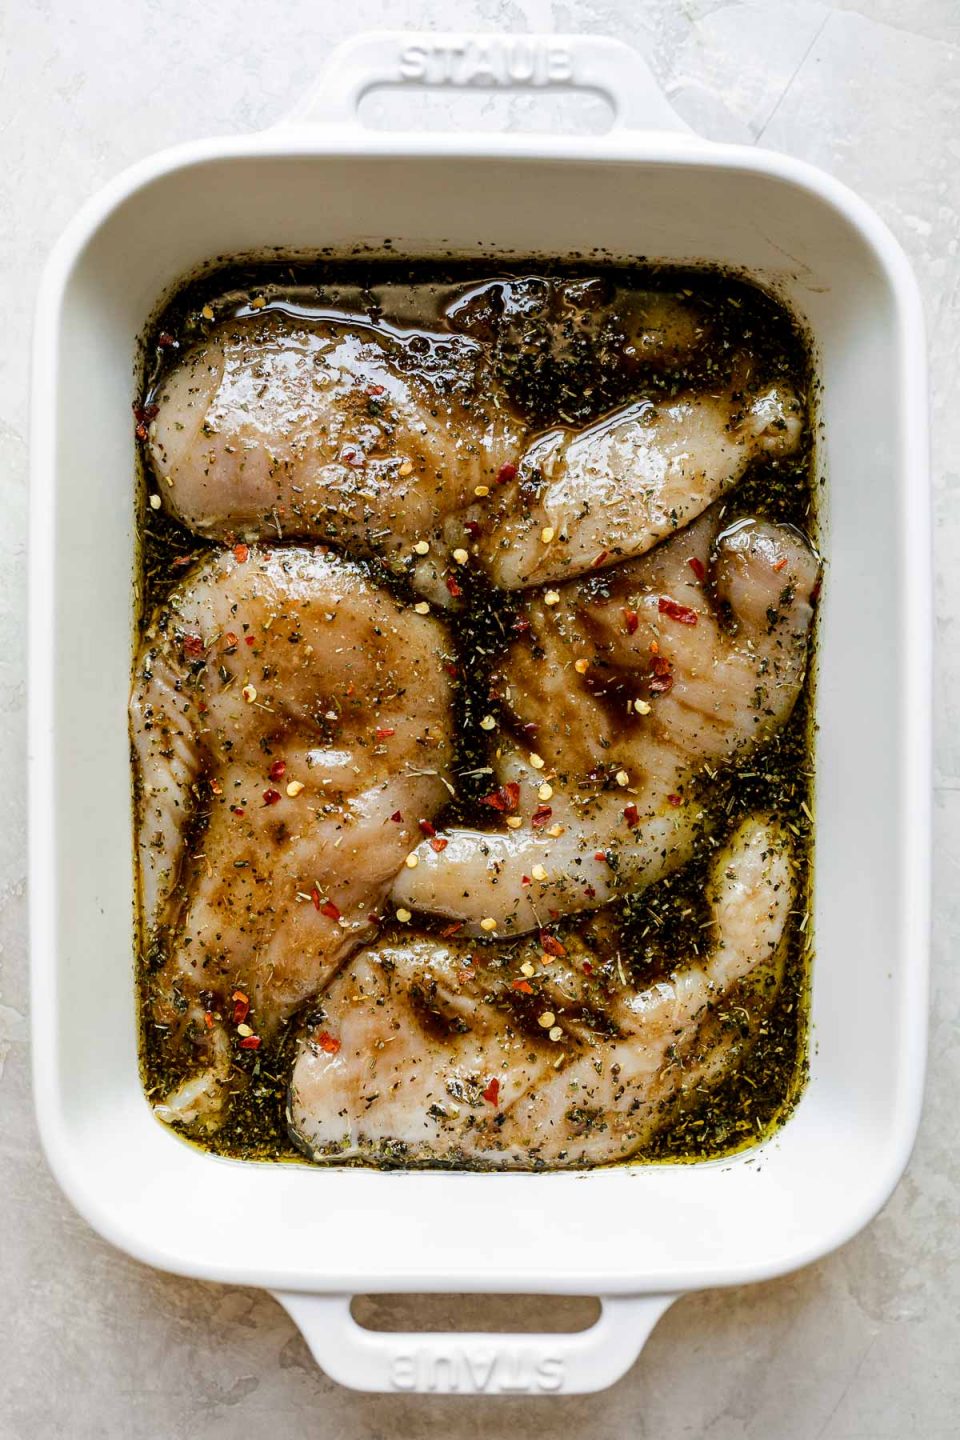 Boneless, skinless chicken breasts rest in a white Staub baking dish filled with simple balsamic marinade. The baking sits on top of a white textured surface.